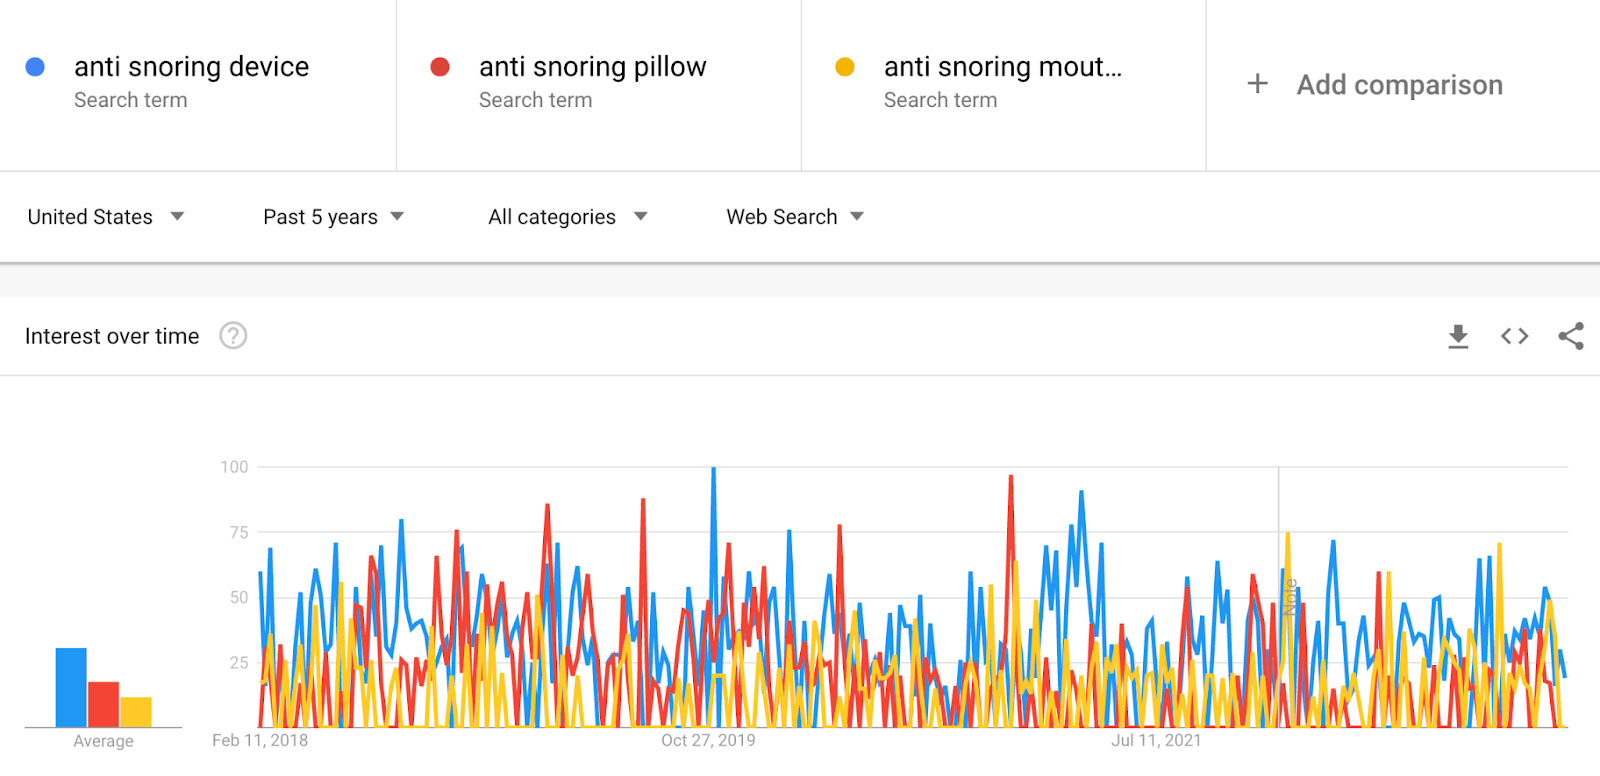 Line graph showing how anti snoring devices, pillows, and mouthpieces all have consistent search trends over the last five years.